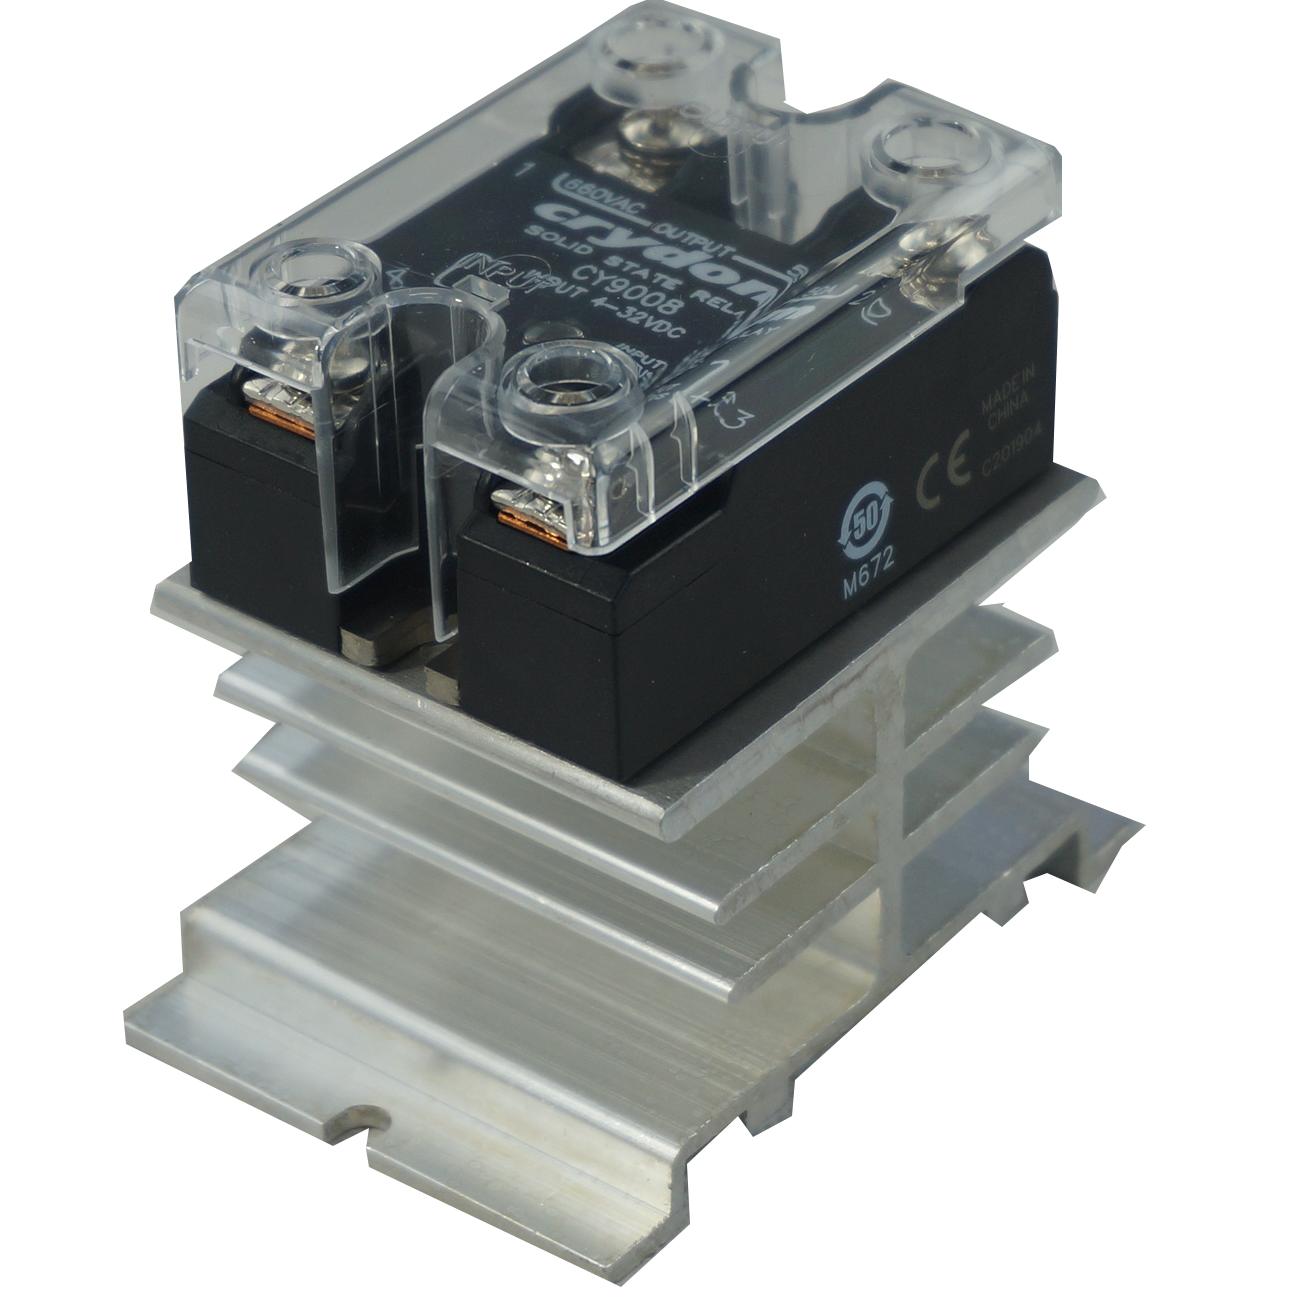 HS211A + CY9008, Panel Mount Solid State Relay, 3-32VDC Control Input, 48-660VAC Output, 25 Amps